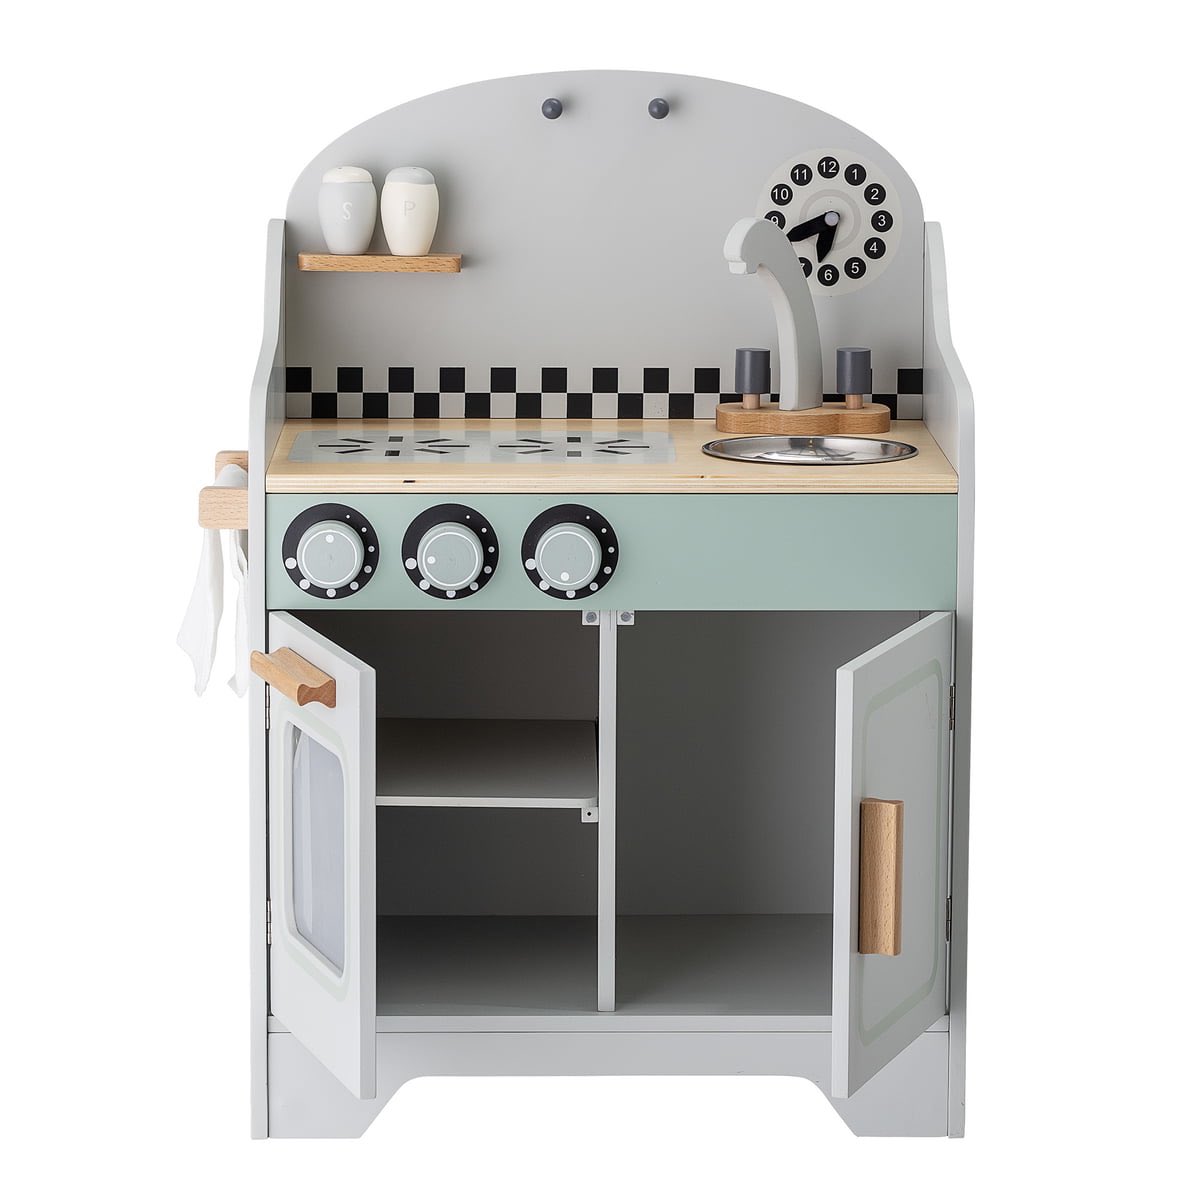 Minimalist and retro, this kitchen is perfect for playing diner. The child playing the cook will become a strong capitalist and entrepreneur; the child playing the server will identify with the common worker and become a socialist.